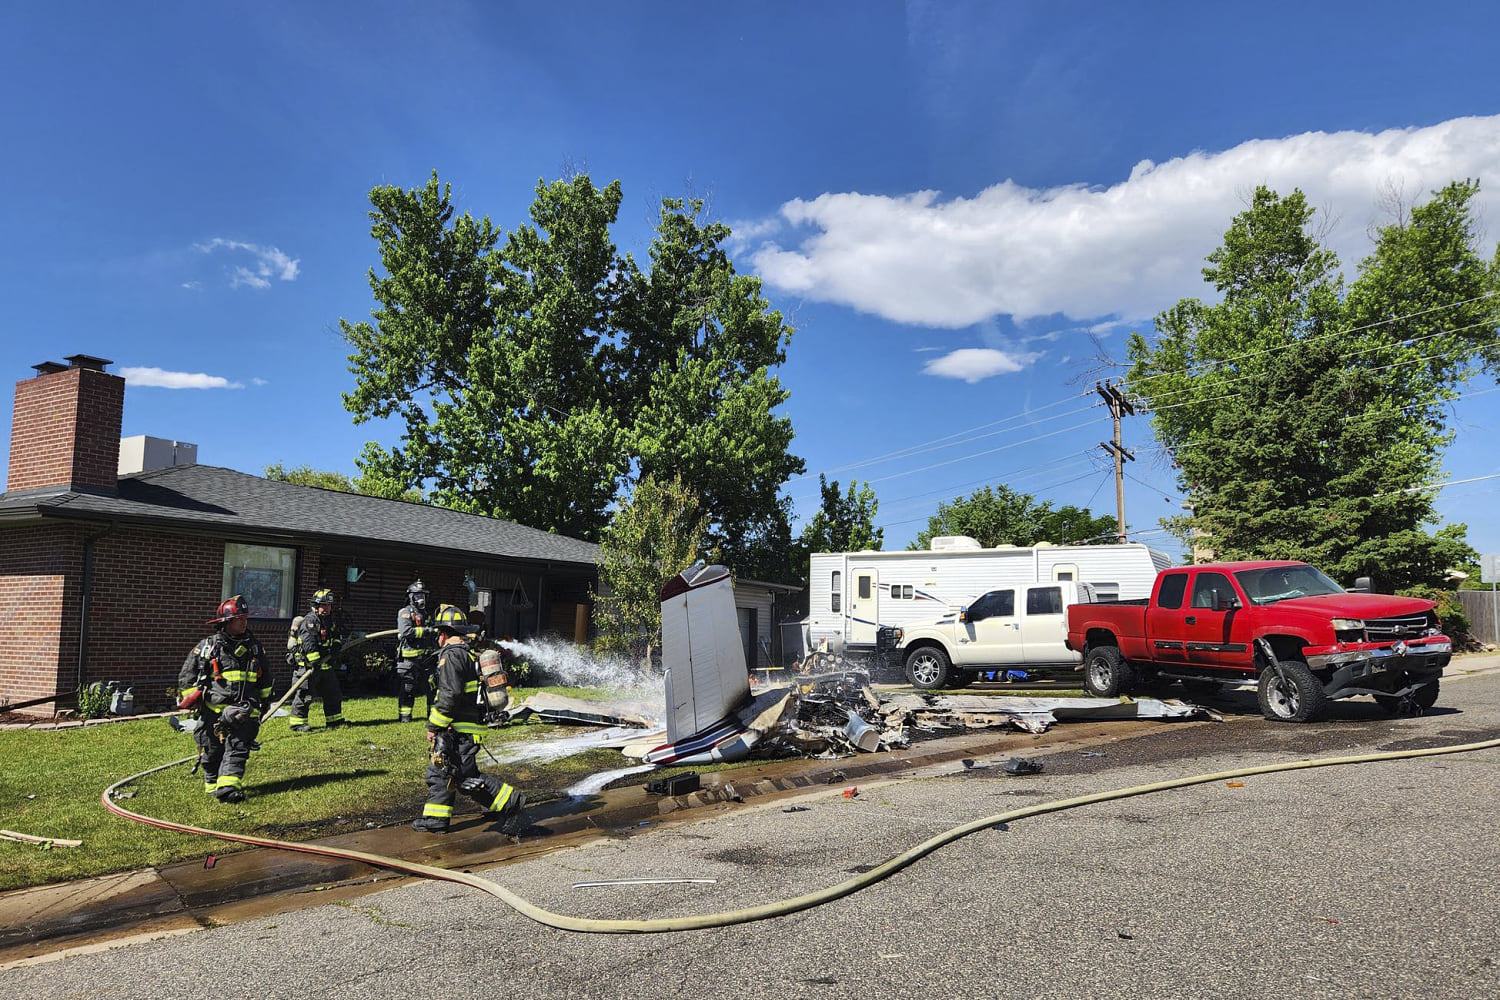 Small airplane crashes in front of Colorado home injuring 4, authorities say